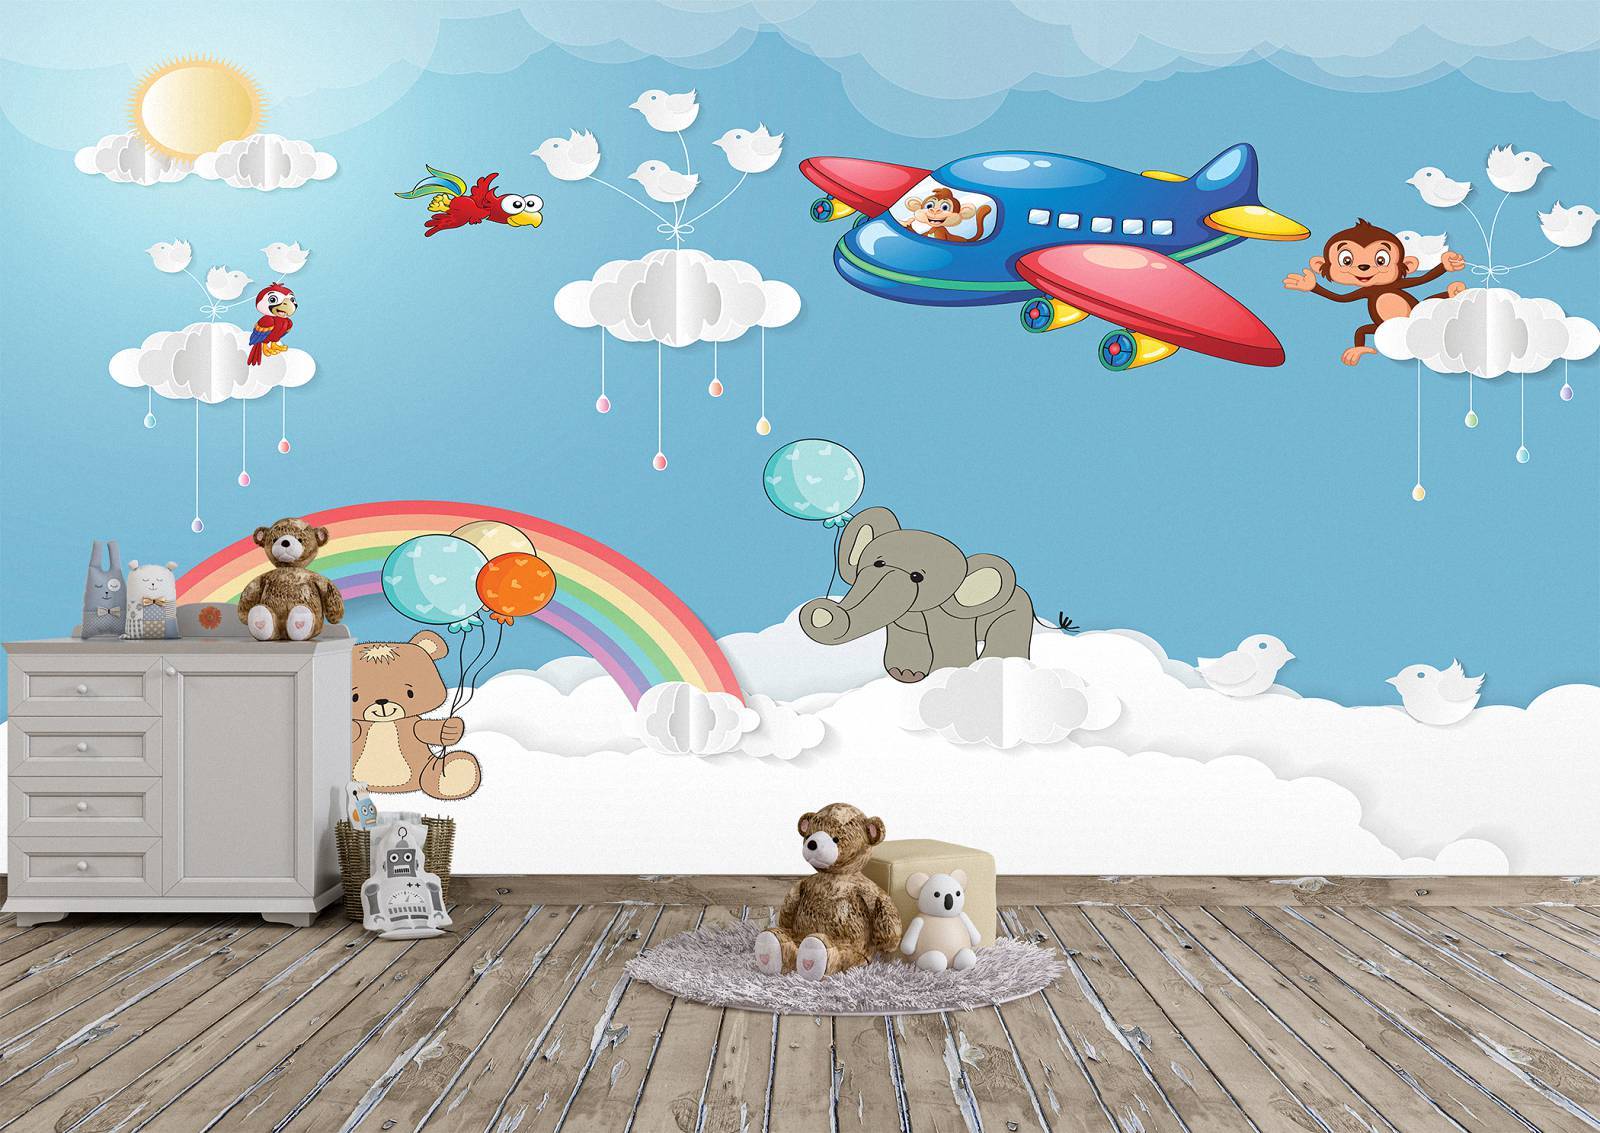 Airplane with Animals Kids Wall Mural Photo Wallpaper UV Print Decal Art Décor